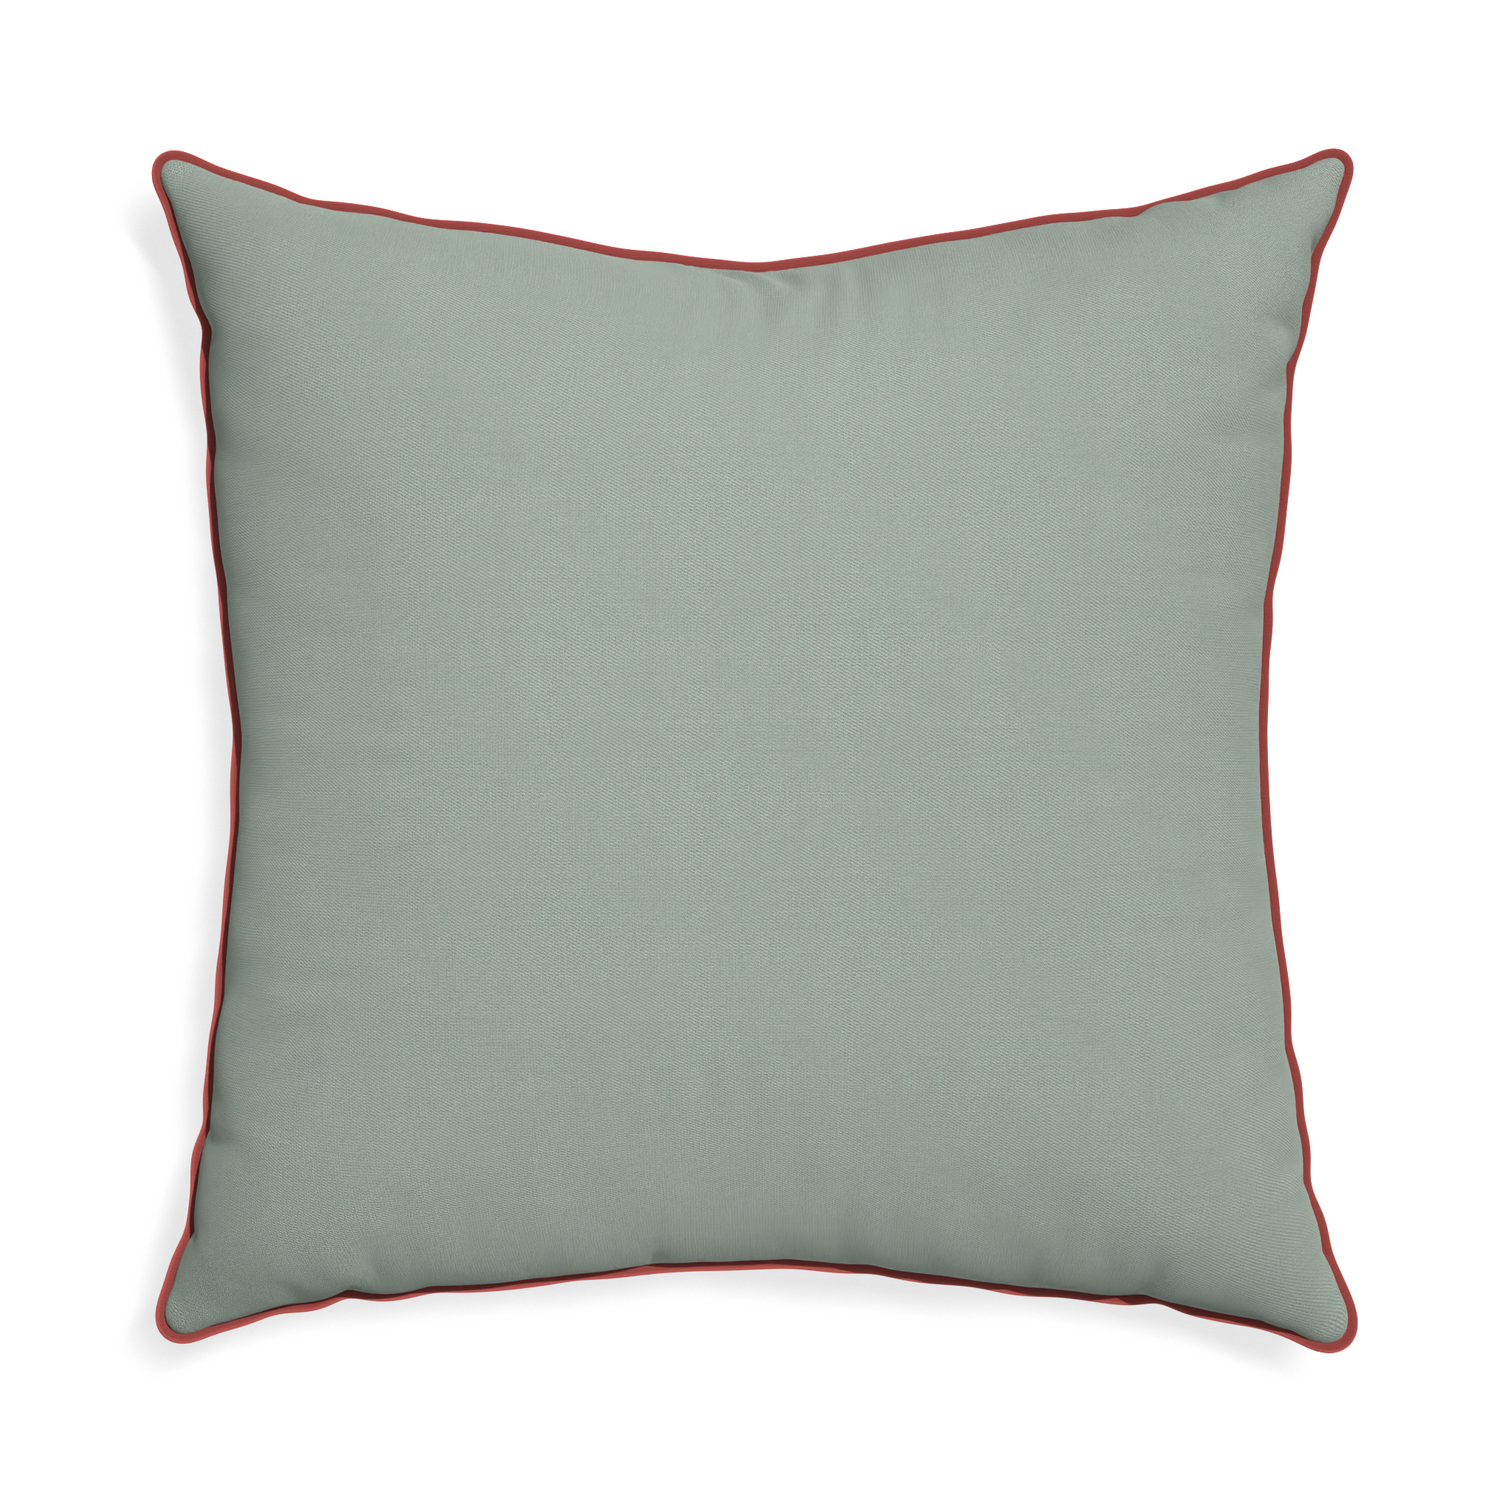 Euro-sham sage custom sage green cottonpillow with c piping on white background